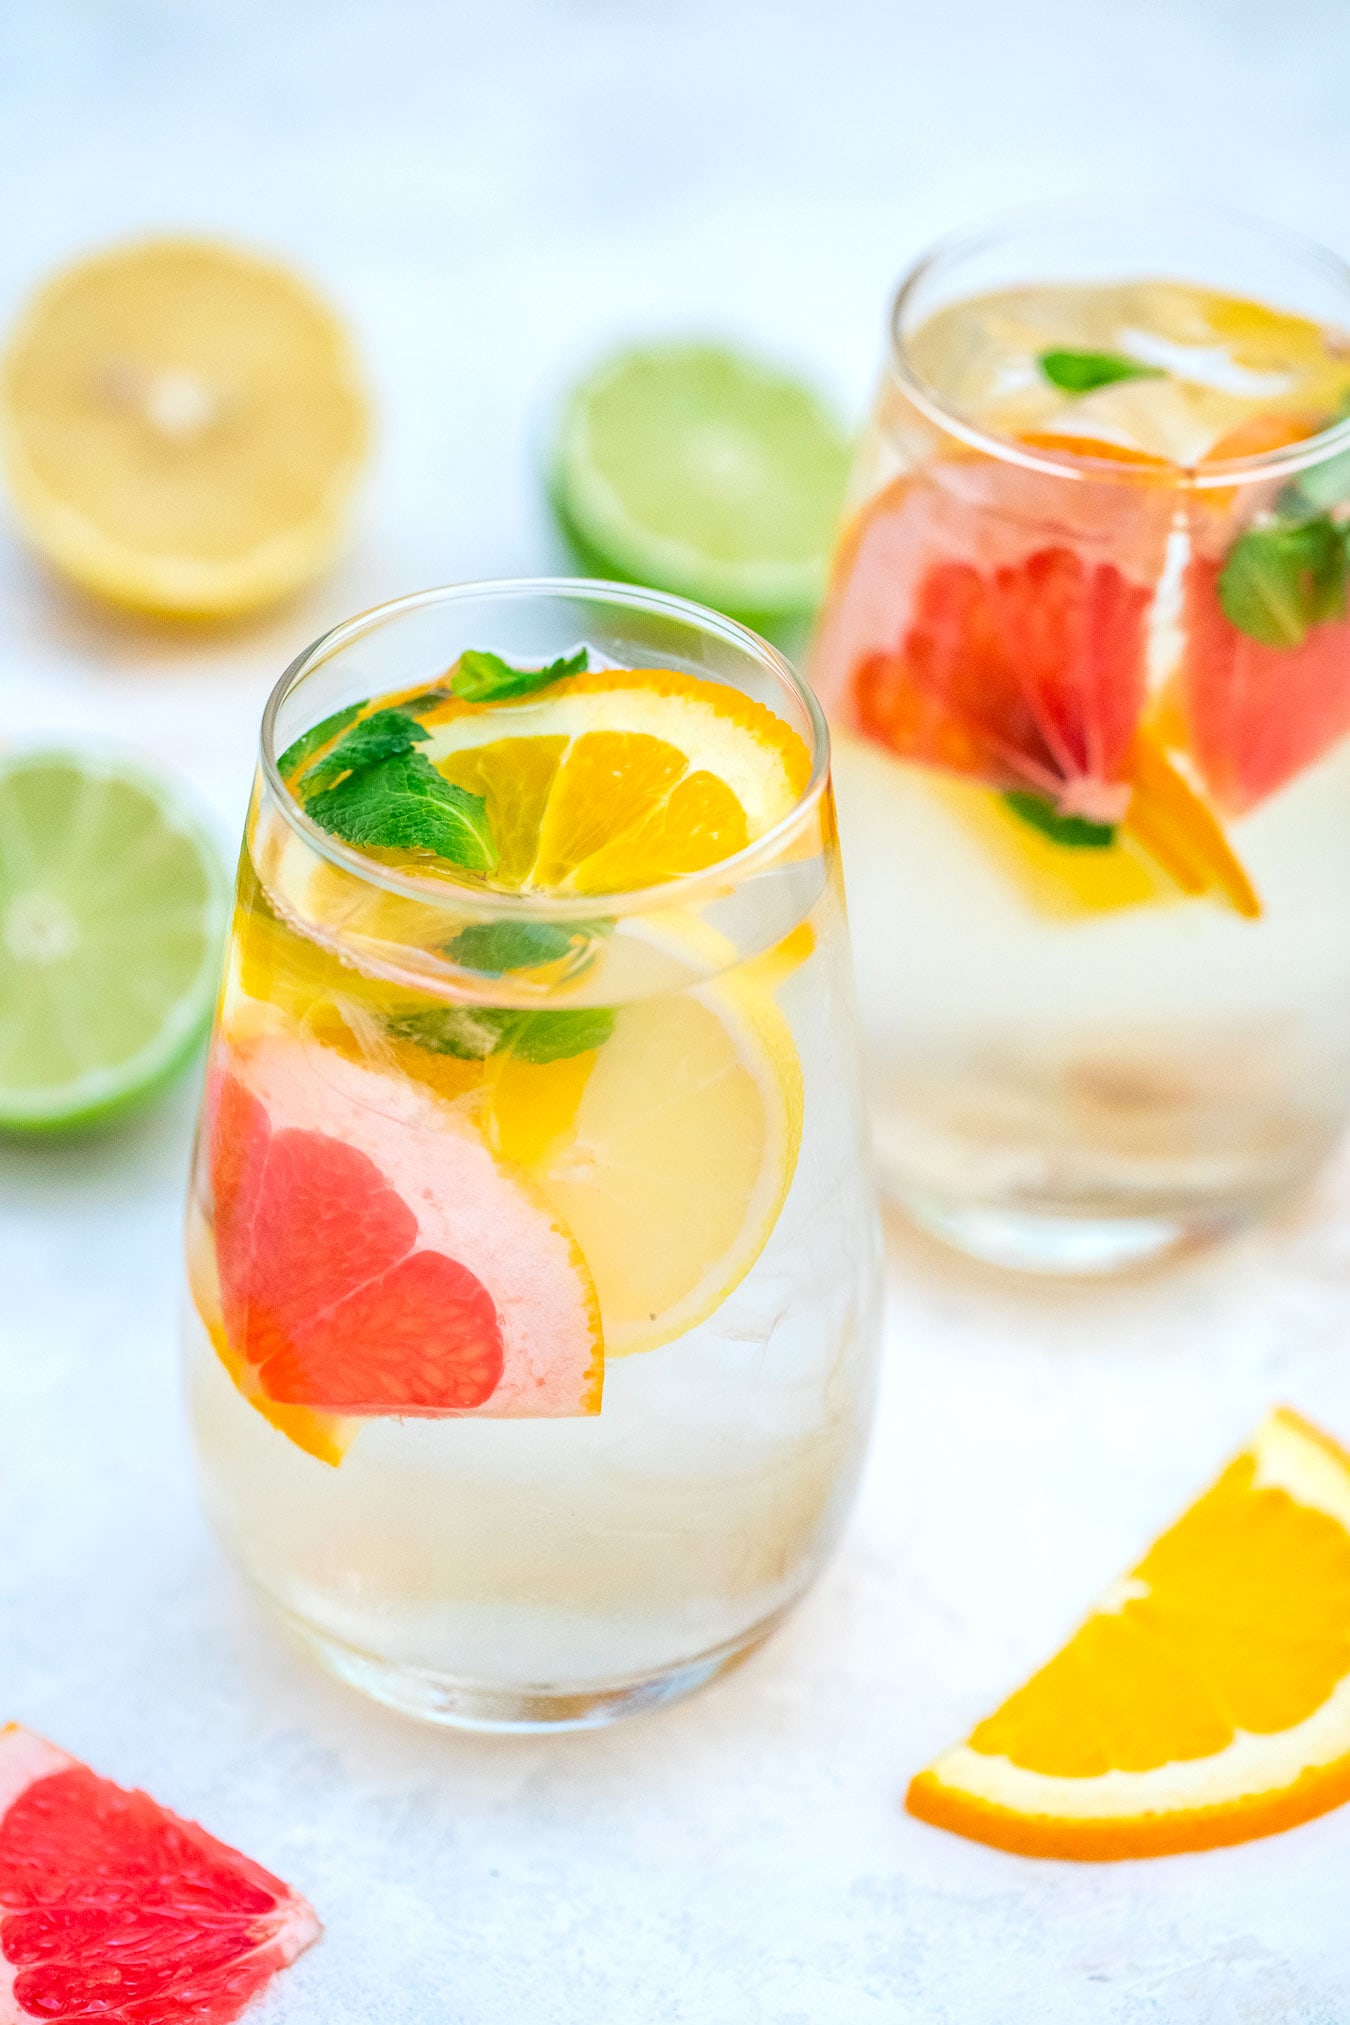 Infused Water Recipes - Simple Joy